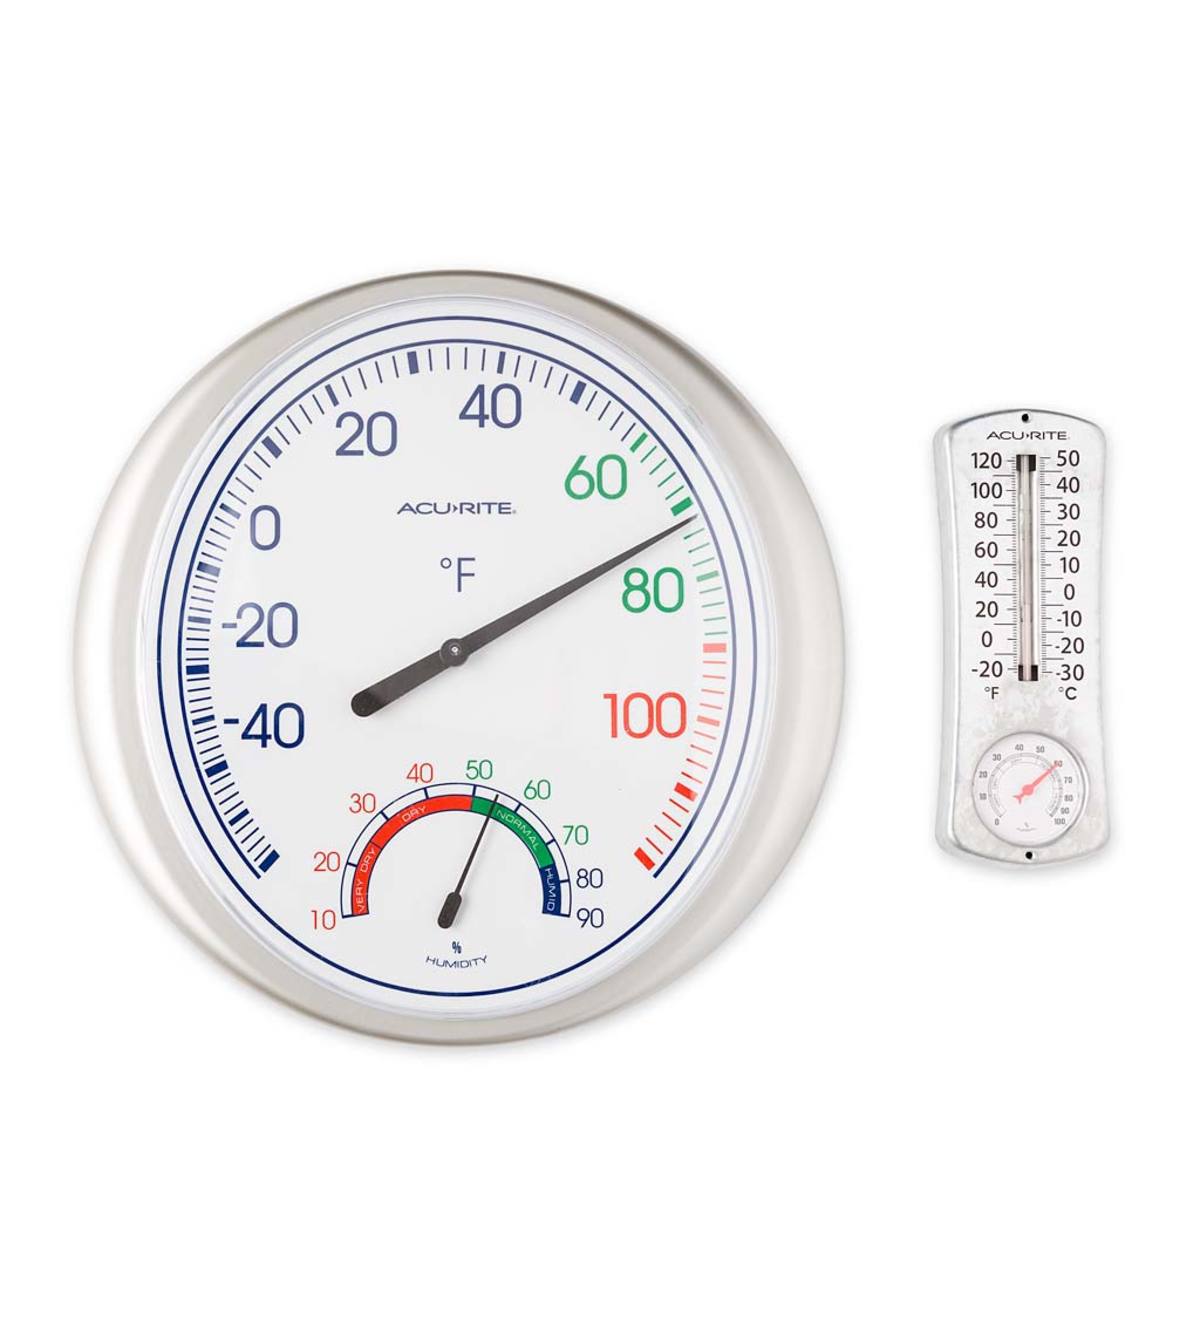 Analog Indoor/Outdoor Thermometer Hygrometer Temperature Humidity Meter 10